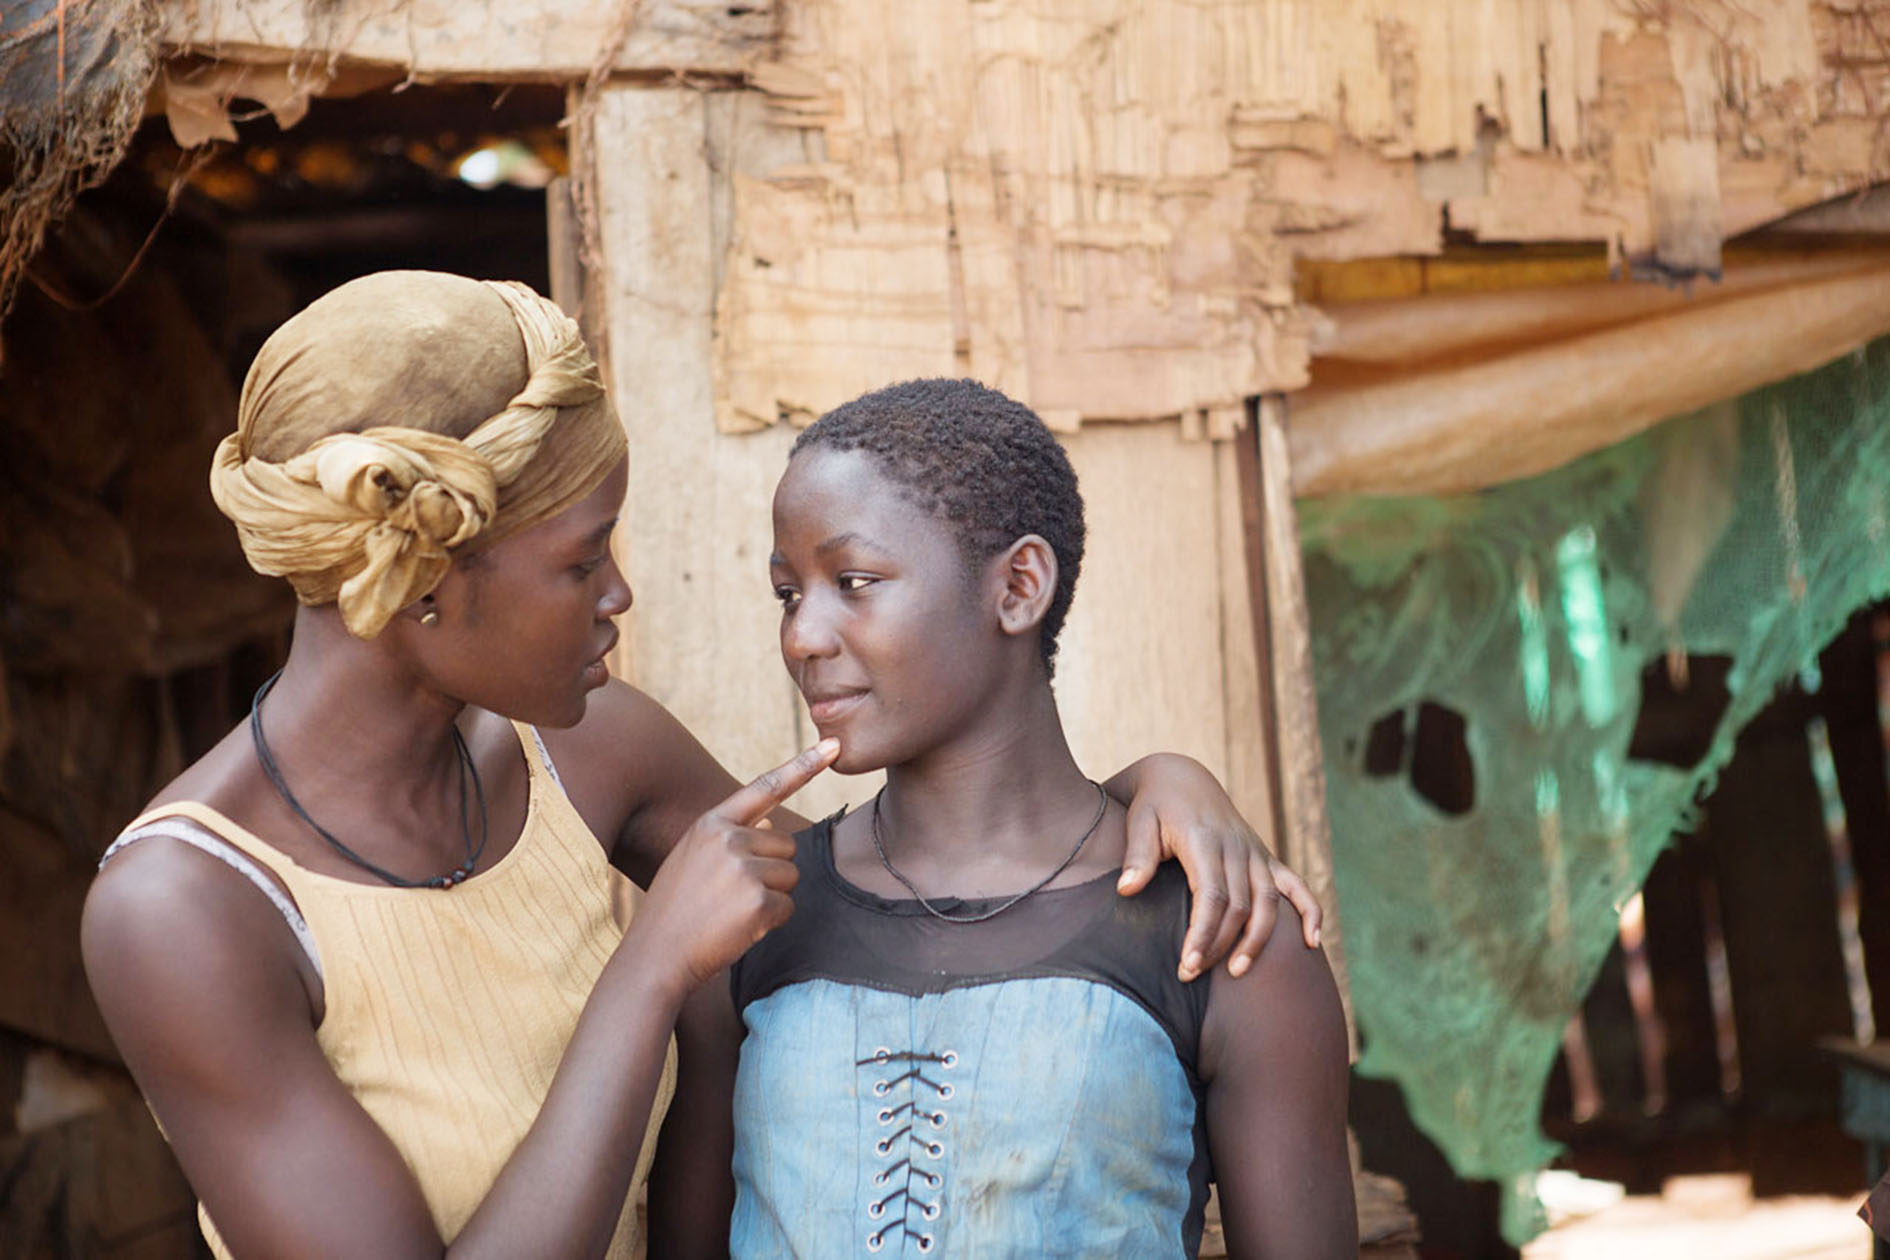 Oscar (TM) winner Lupita Nyong'o and newcomer Madina Nalwanga in Disney's QUEEN OF KATWE, the vibrant true story of a young girl from rural Uganda whose world rapidly changes when she is introduced to the game of chess. The powerful film also stars David Oyelowo and is directed by Mira Nair.